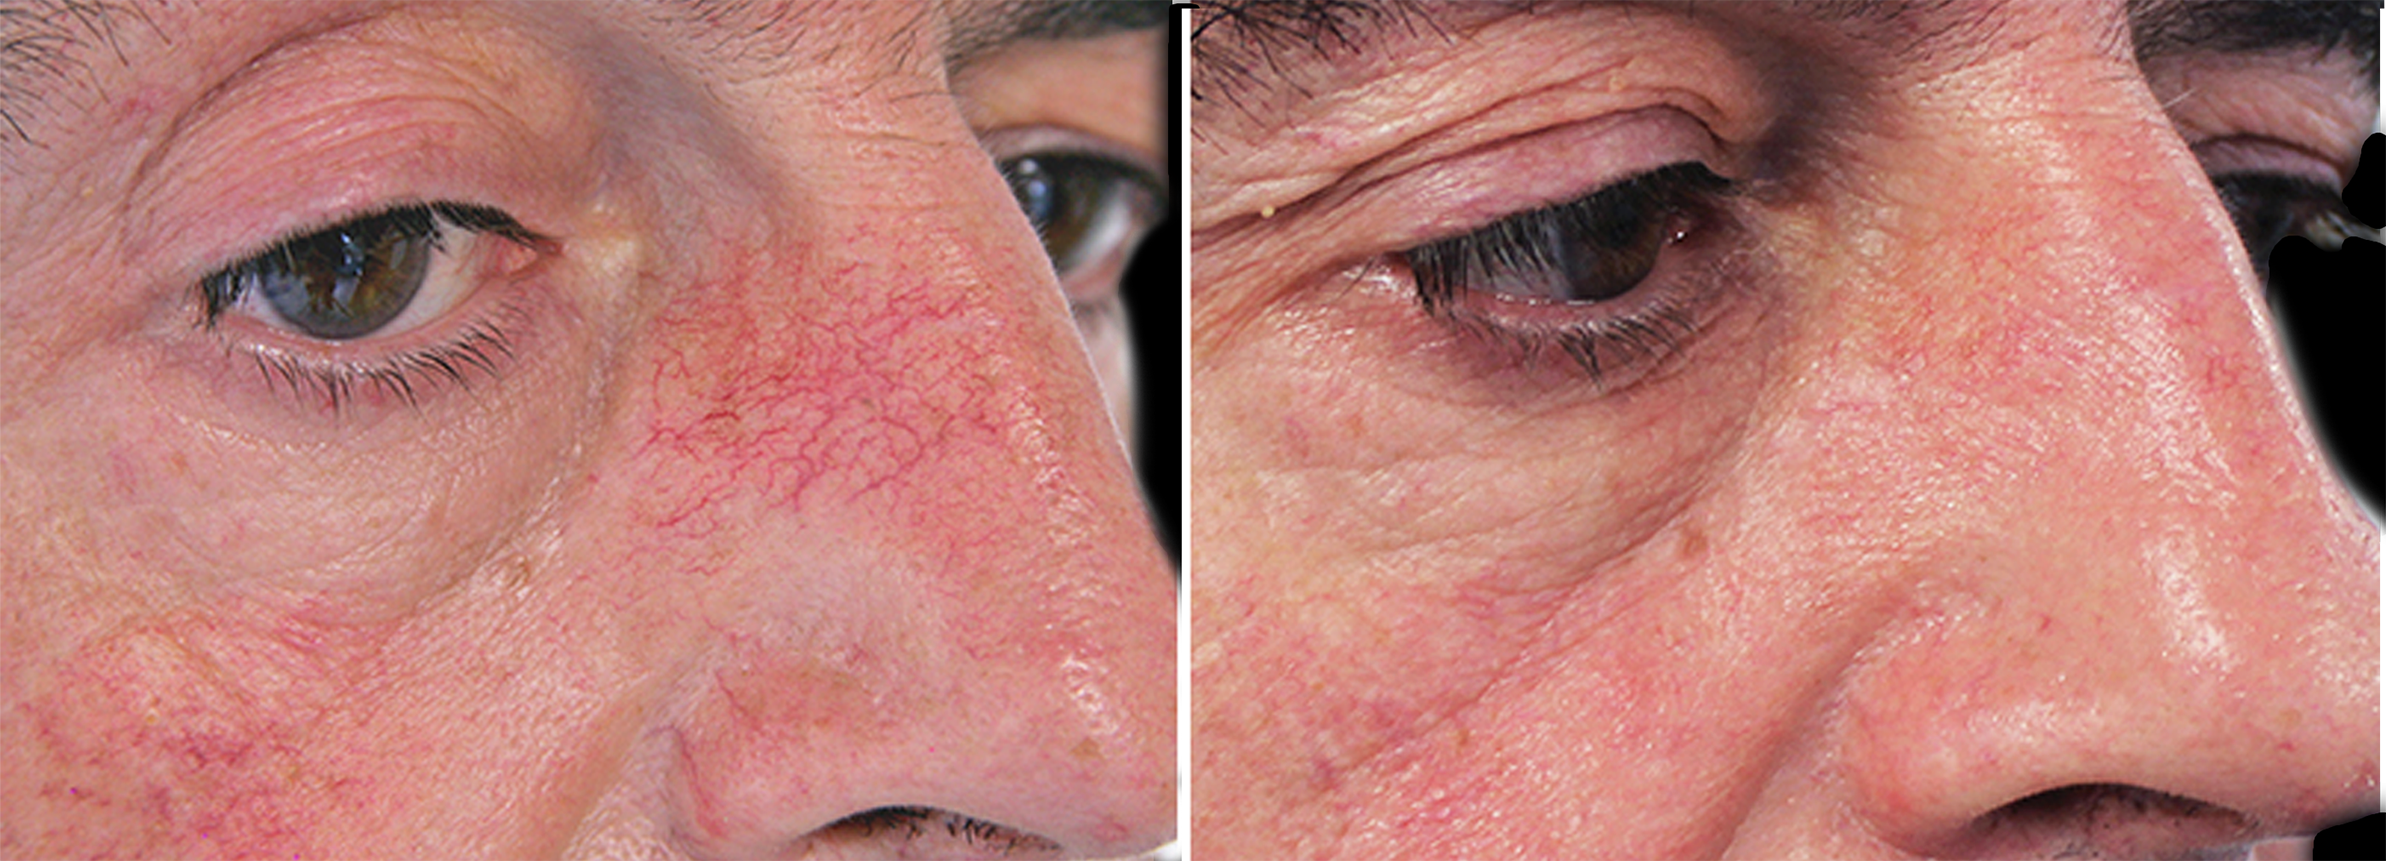 Long Island facial vein removal before after